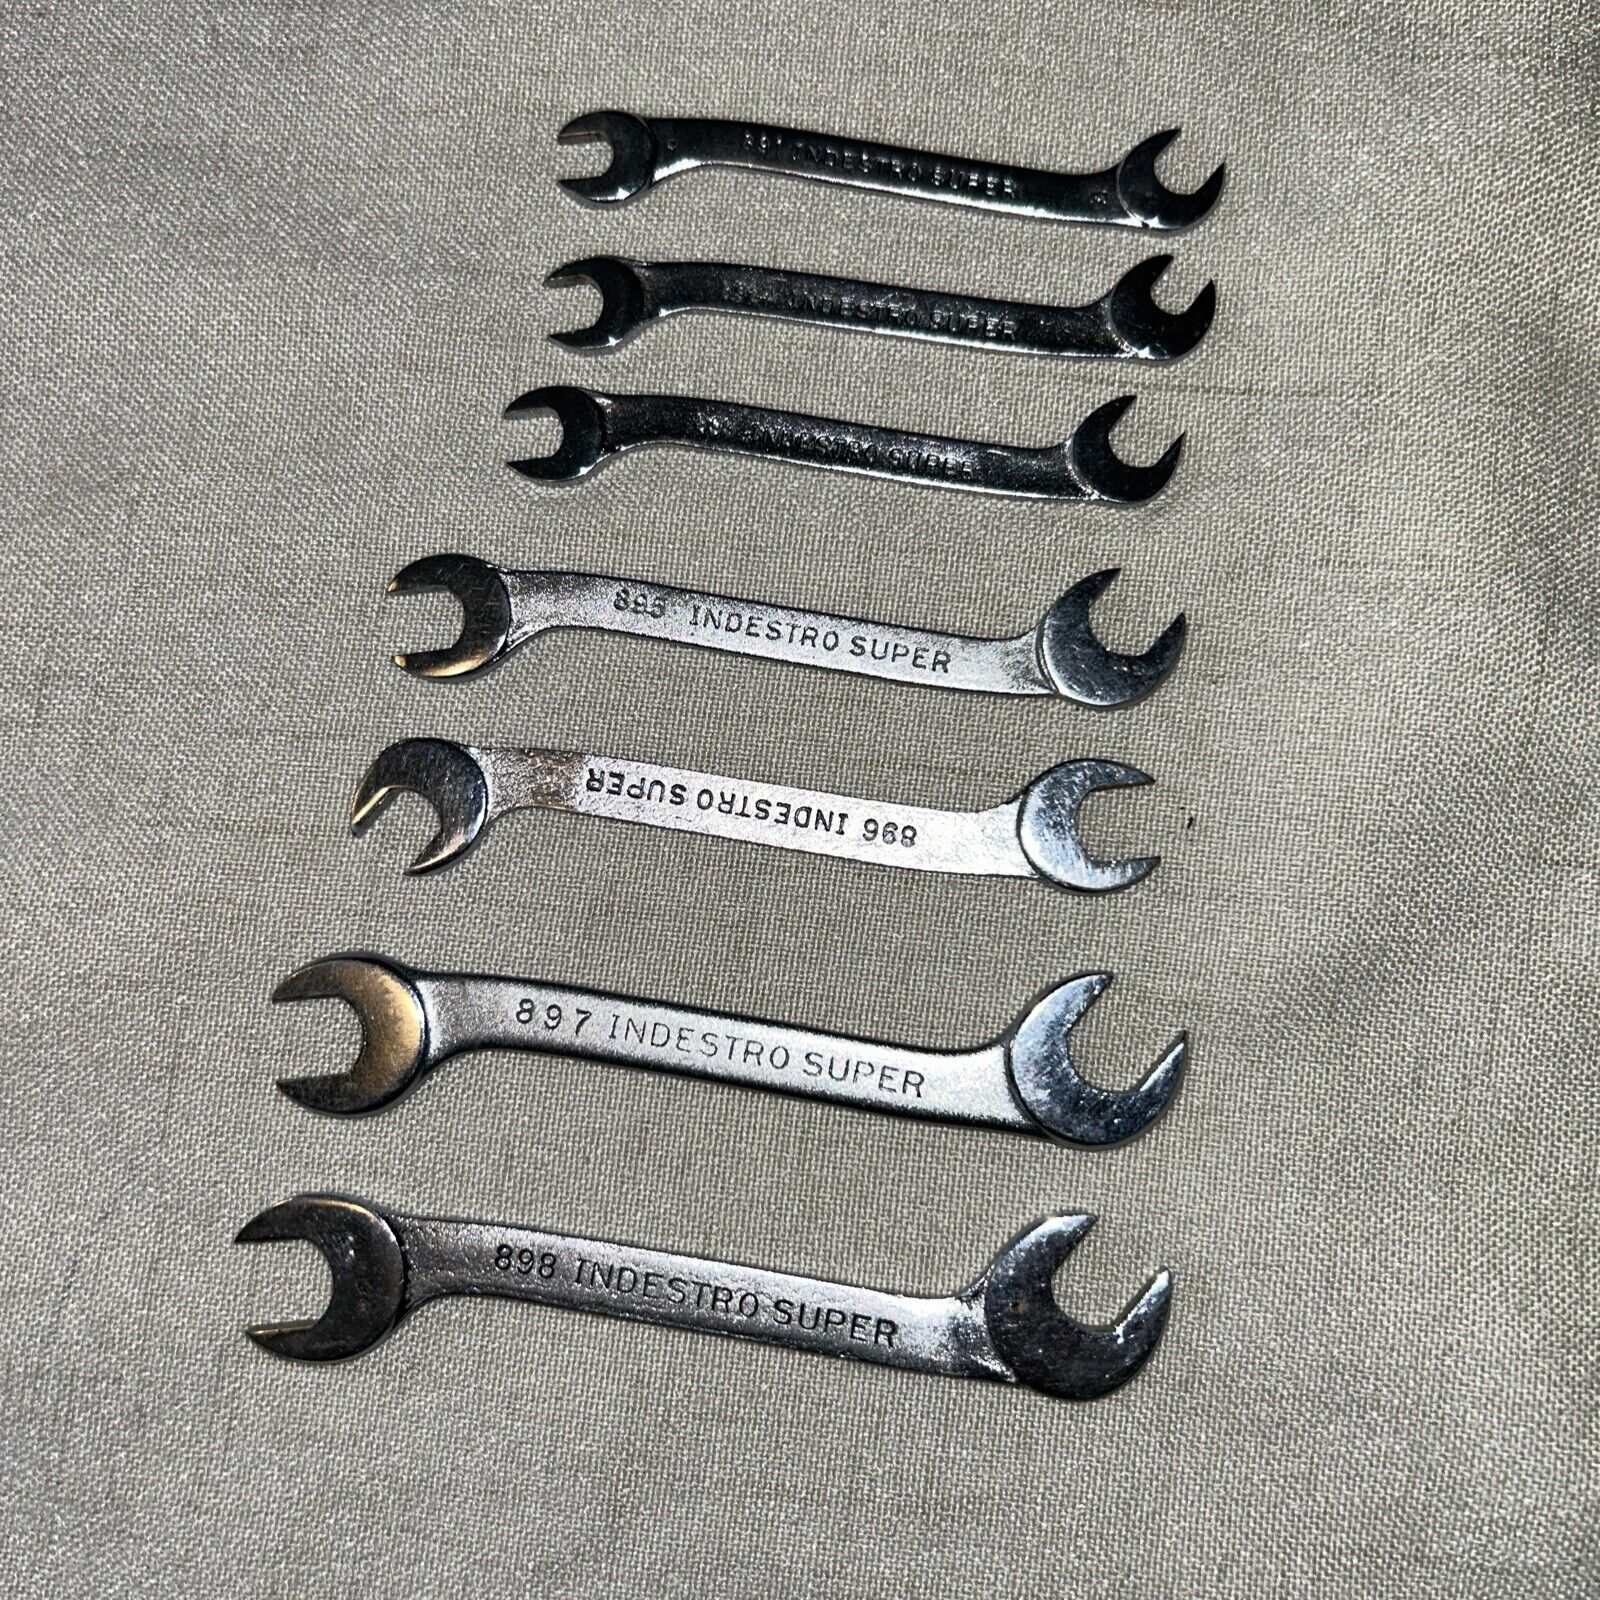 Vintage INDESTRO Super Combination Wrench Set 800 Series USA Lot of 7